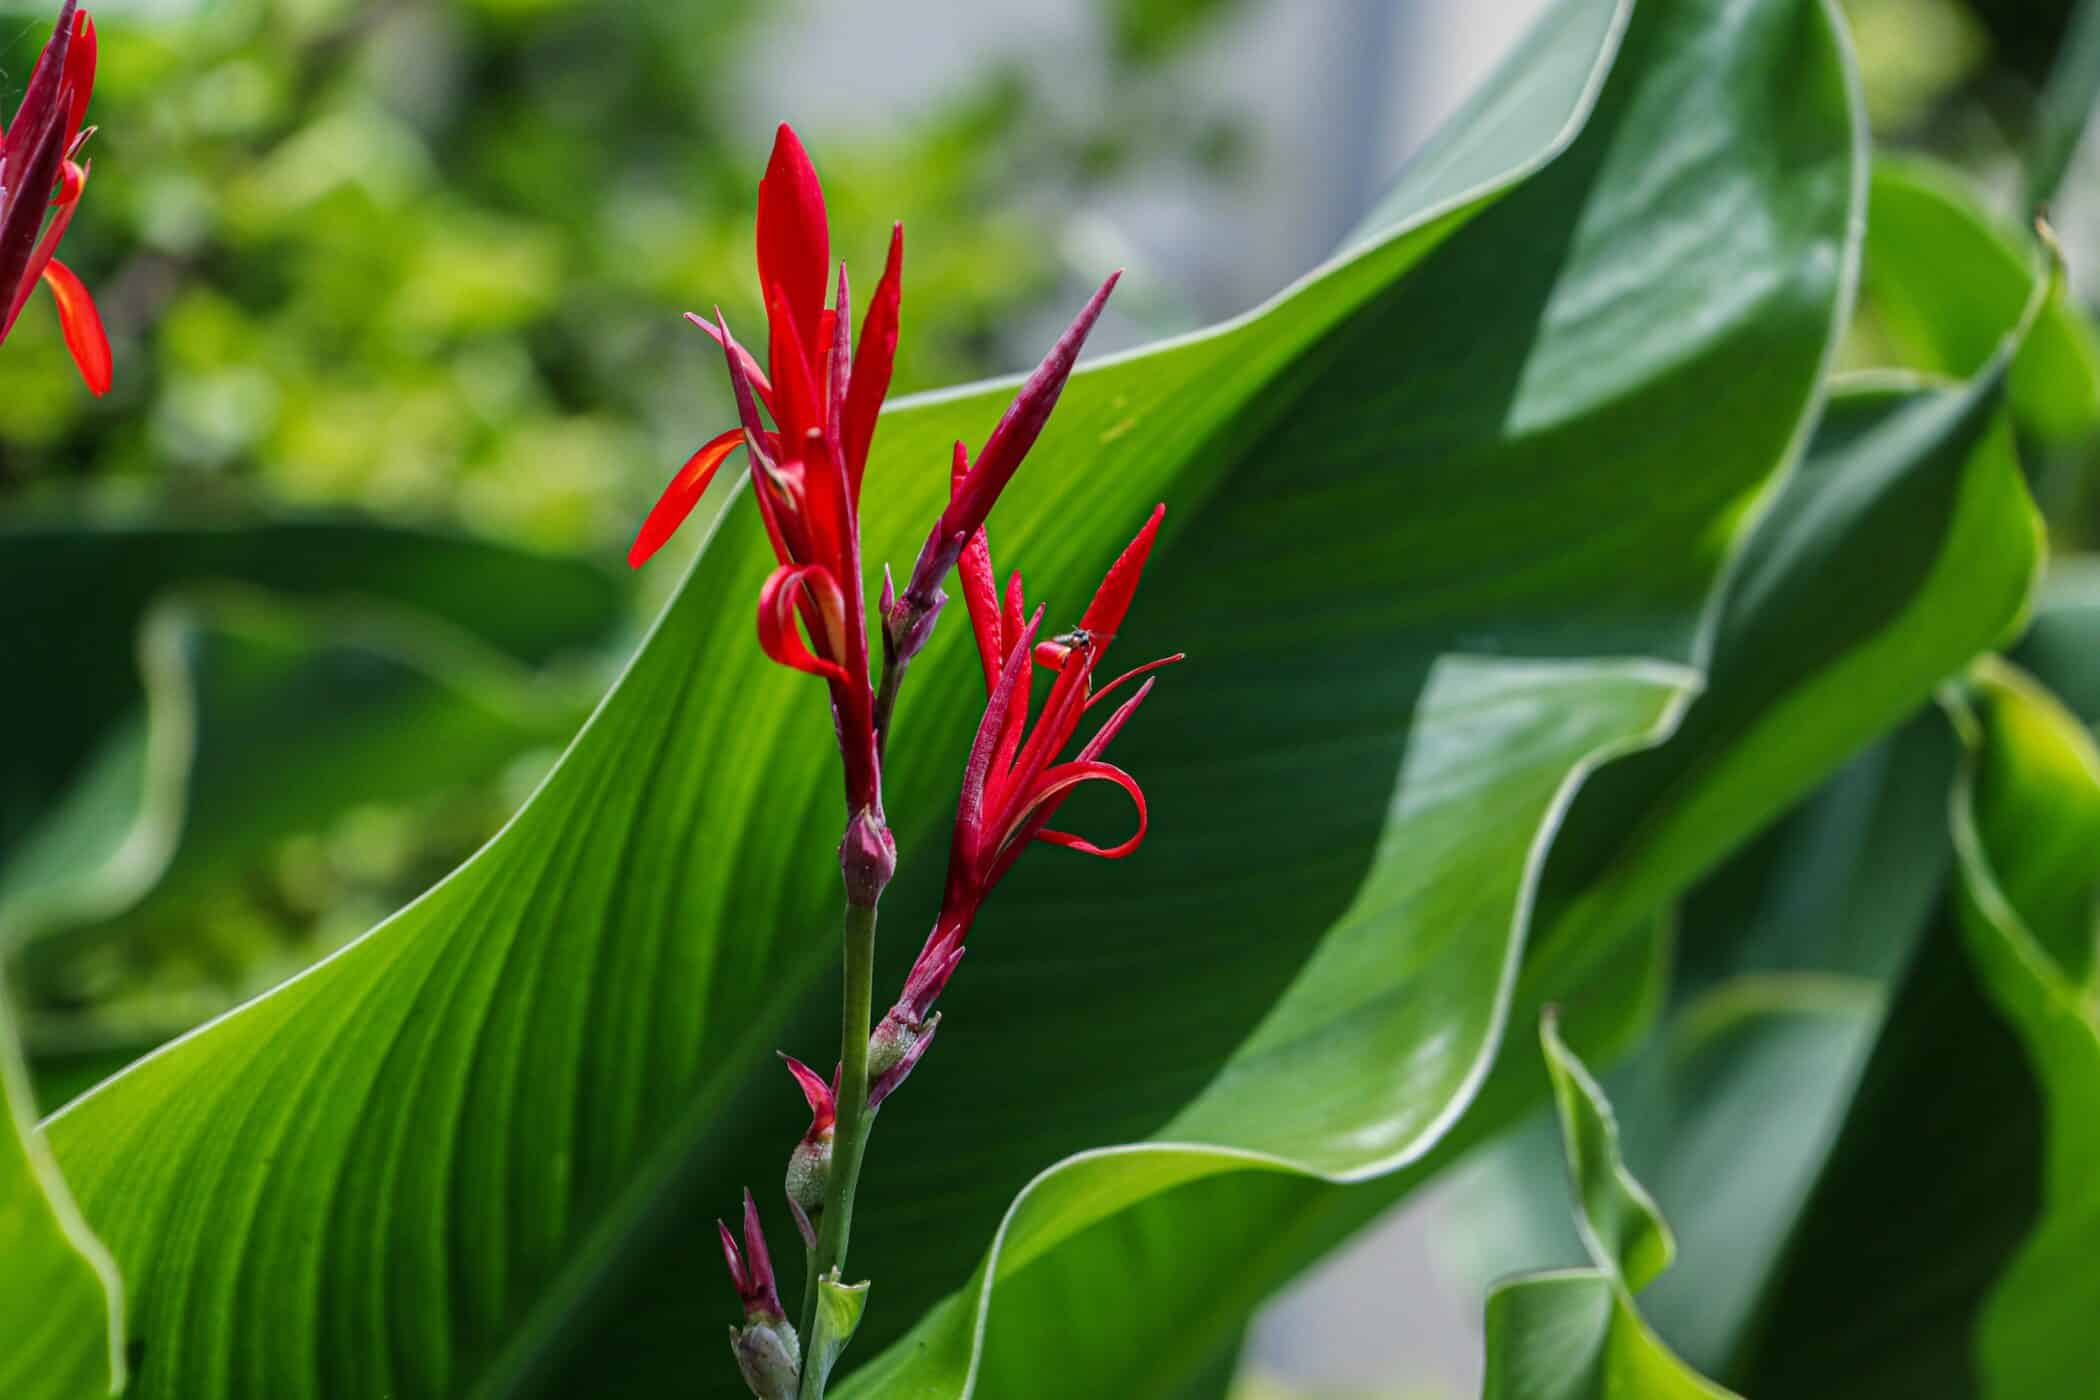 A Canna pictured in a tropical environment